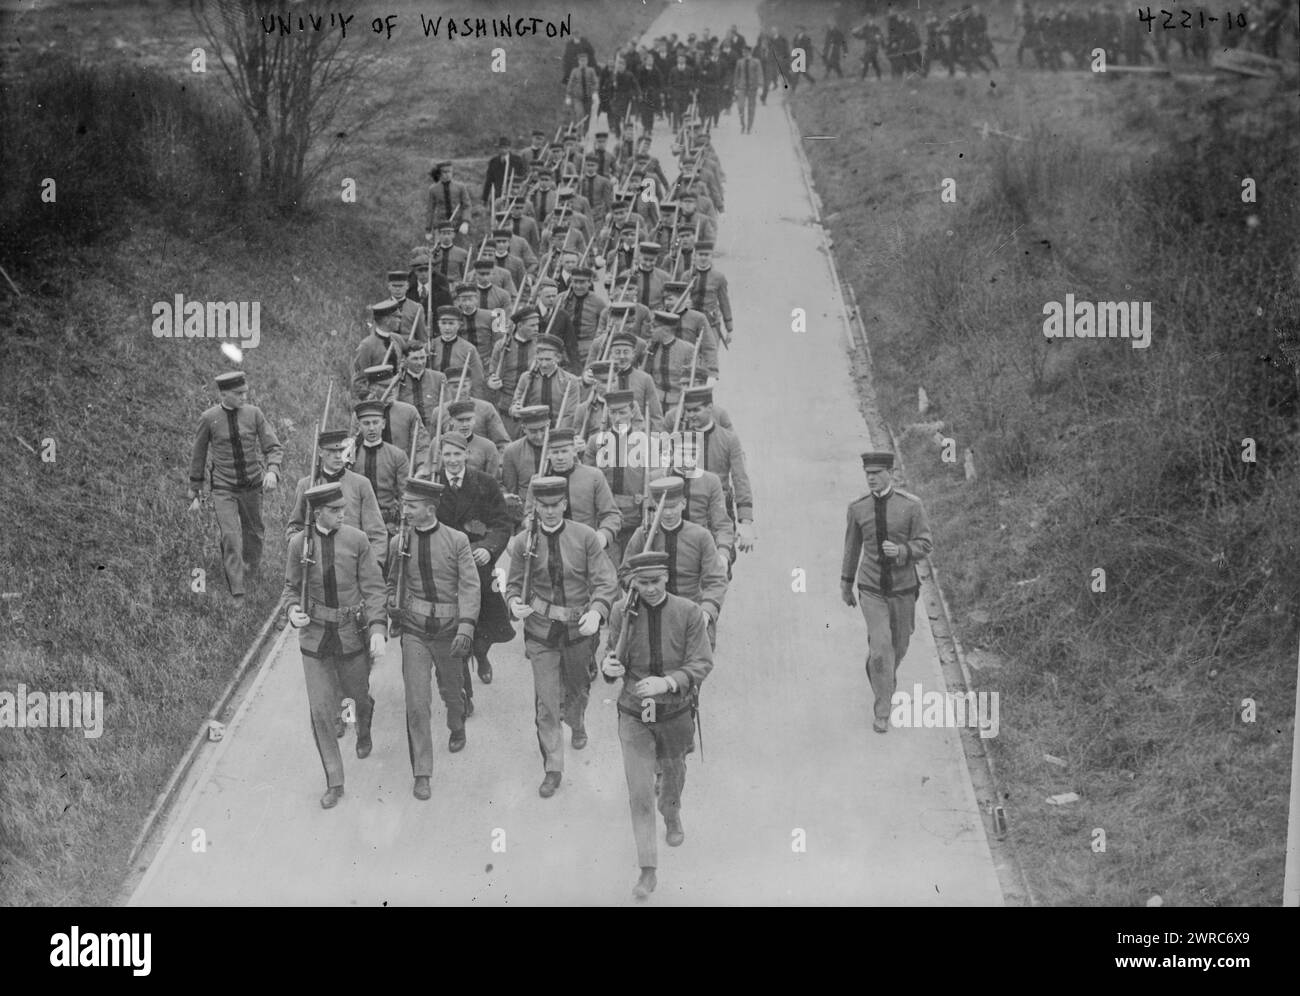 Univ'y of Wash., Photograph shows military personnel training at the University of Washington, Seattle, Washington State., between ca. 1915 and ca. 1920, Glass negatives, 1 negative: glass Stock Photo